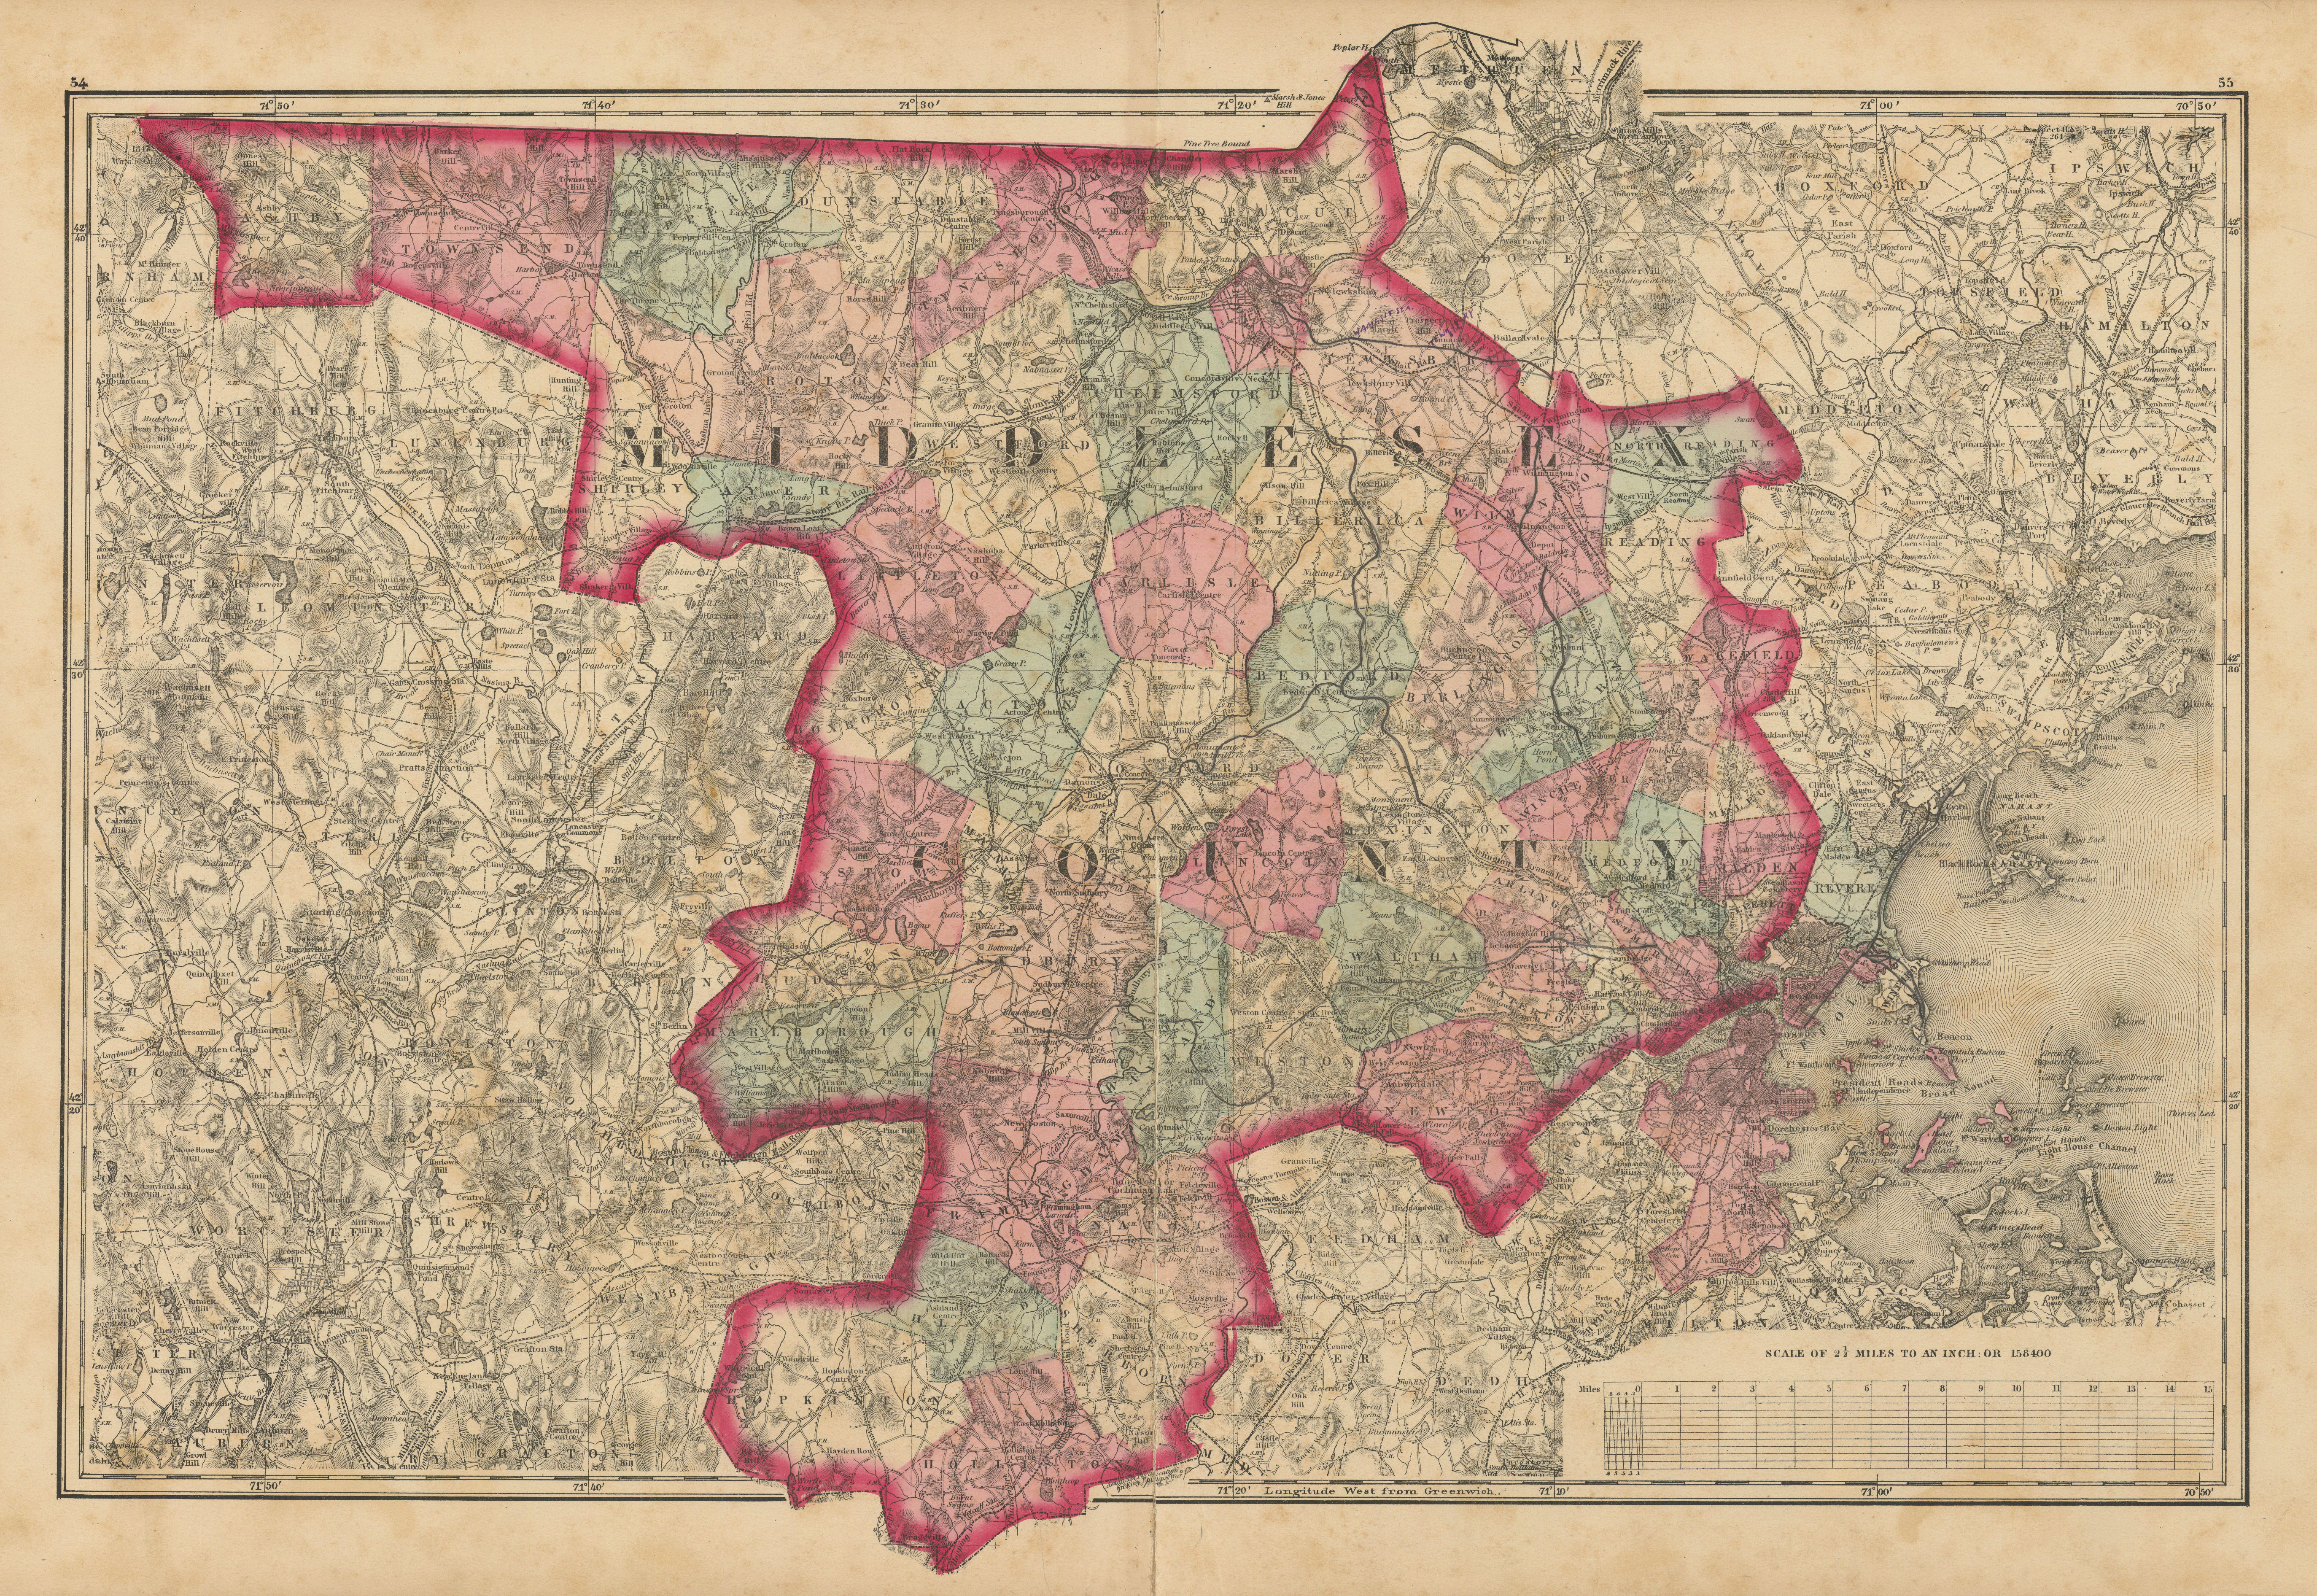 Associate Product Middlesex County, Massachusetts. WALLING & GRAY 1871 old antique map chart